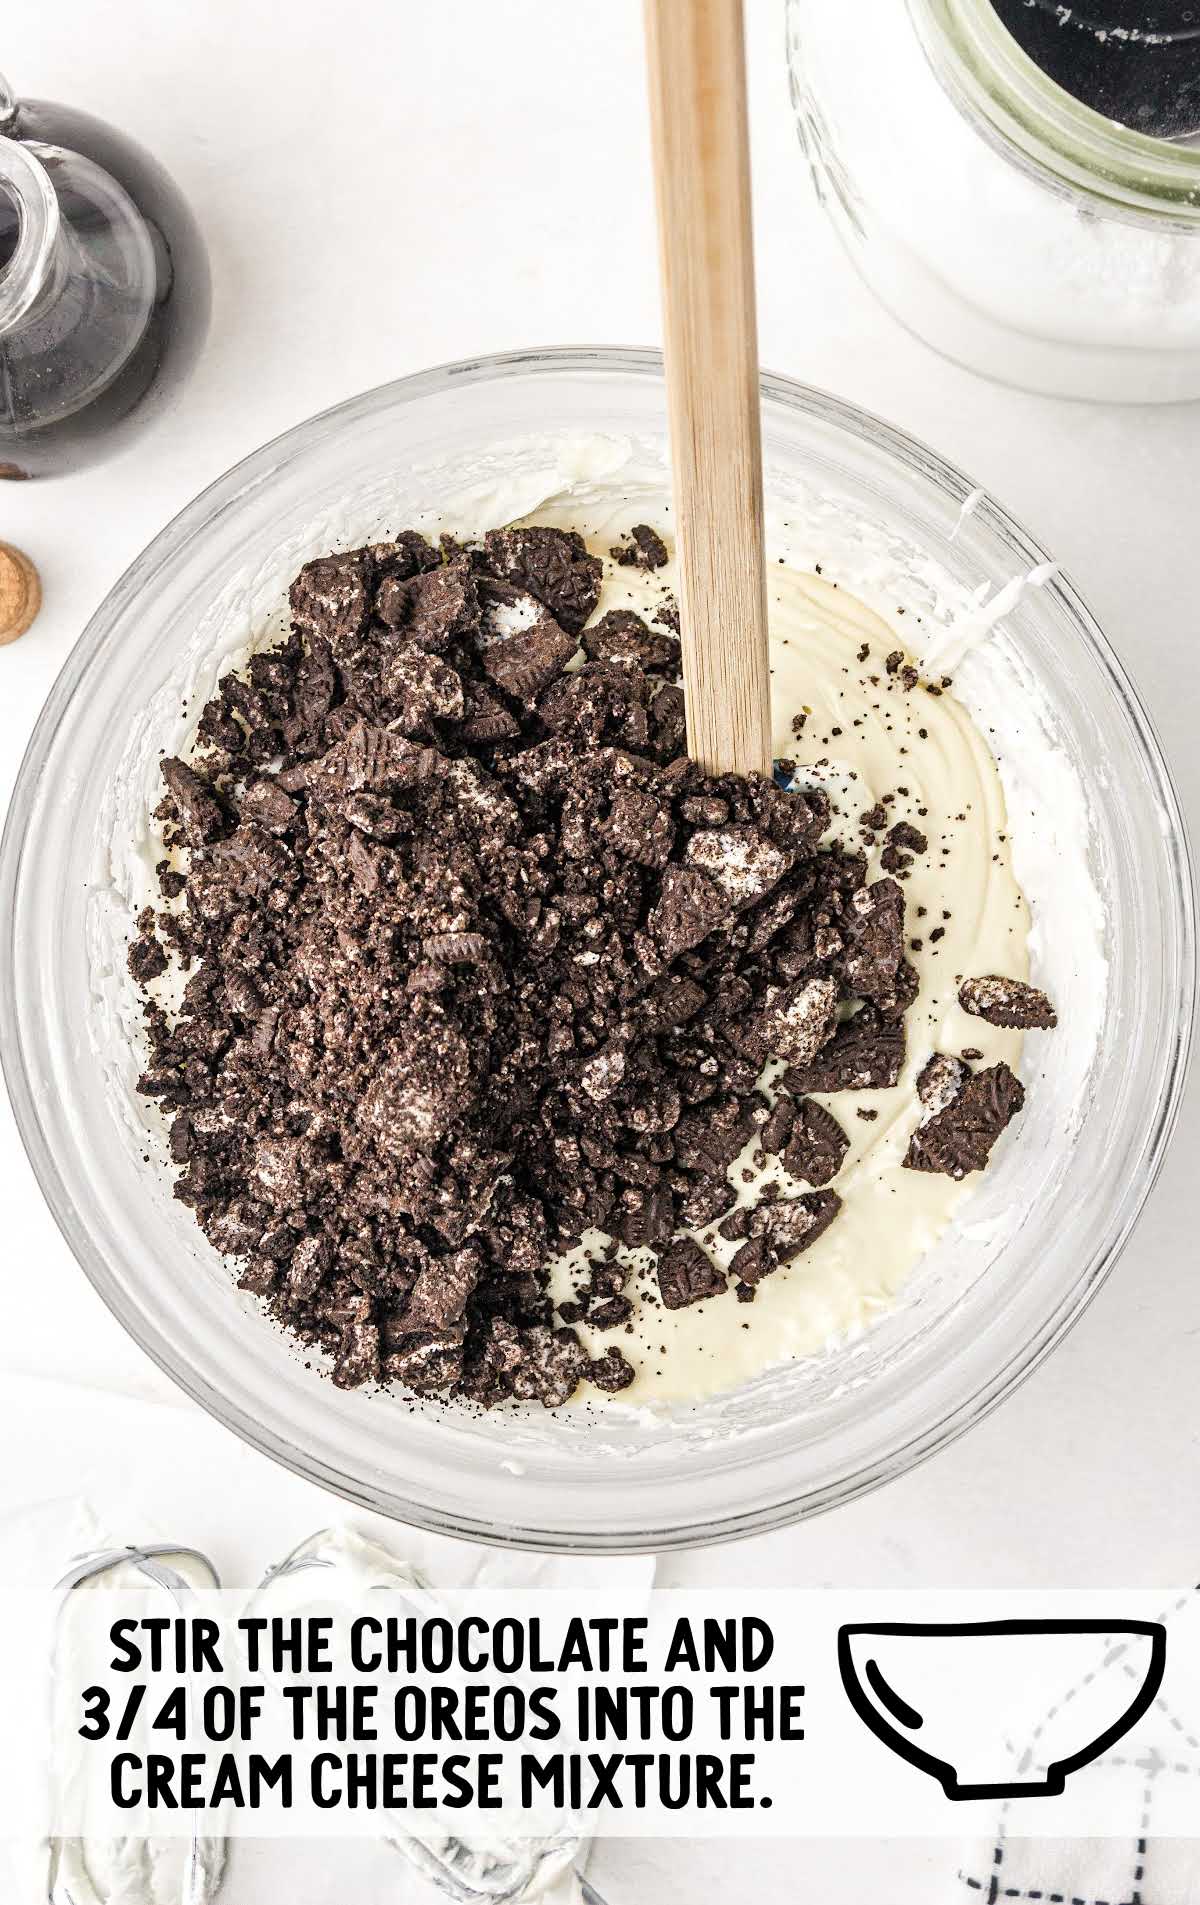 chocolate and oreos stirred into the cream cheese mixture